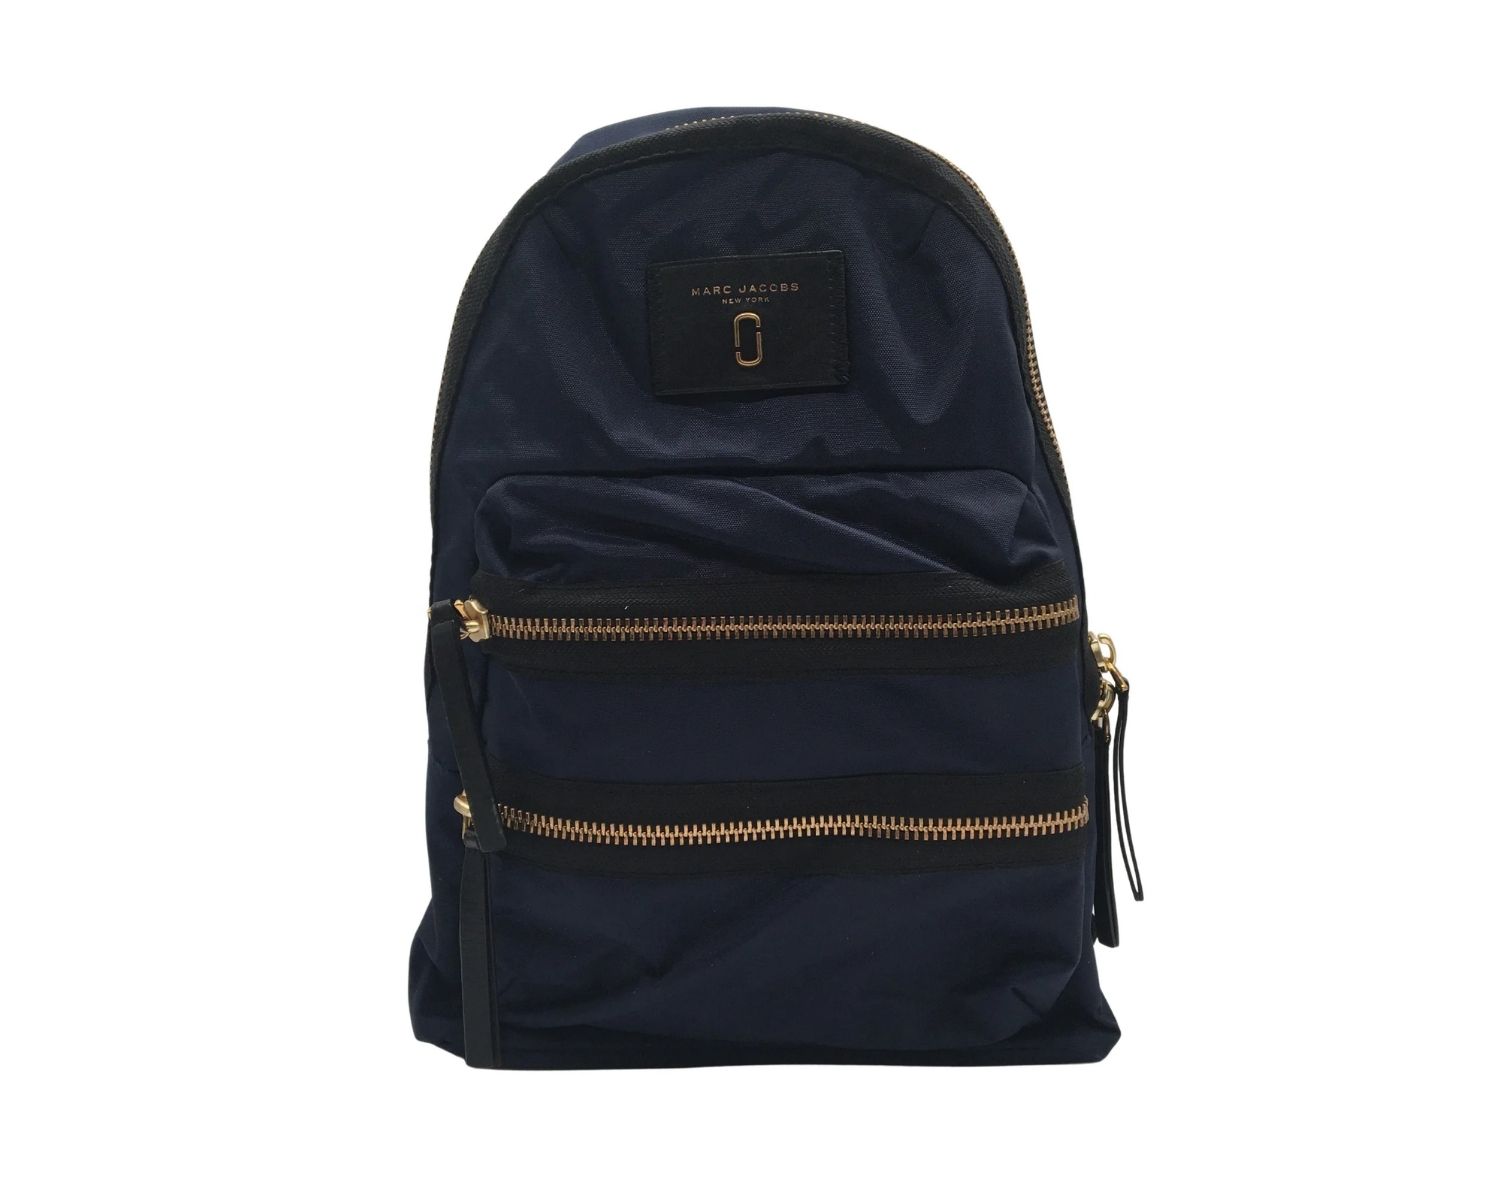 Marc Jacobs Backpack - Facts.net